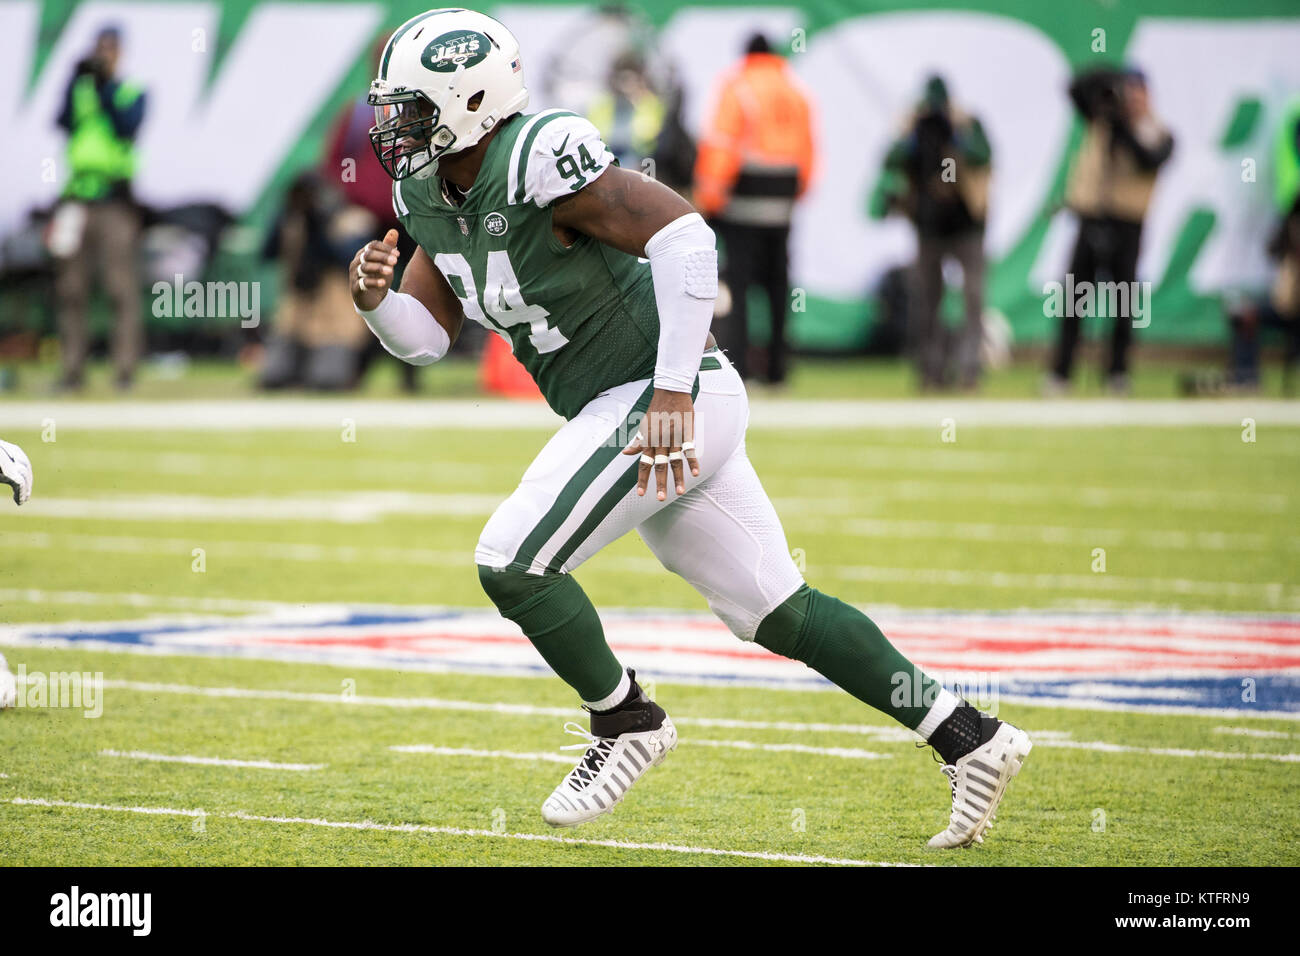 East Rutherford, New Jersey, USA. 24th Dec, 2017. New York Jets defensive end Kony Ealy (94) in action during the NFL game between the Los Angeles Chargers and the New York Jets at MetLife Stadium in East Rutherford, New Jersey. The Los Angeles Chargers won 14-7. Christopher Szagola/CSM/Alamy Live News Stock Photo